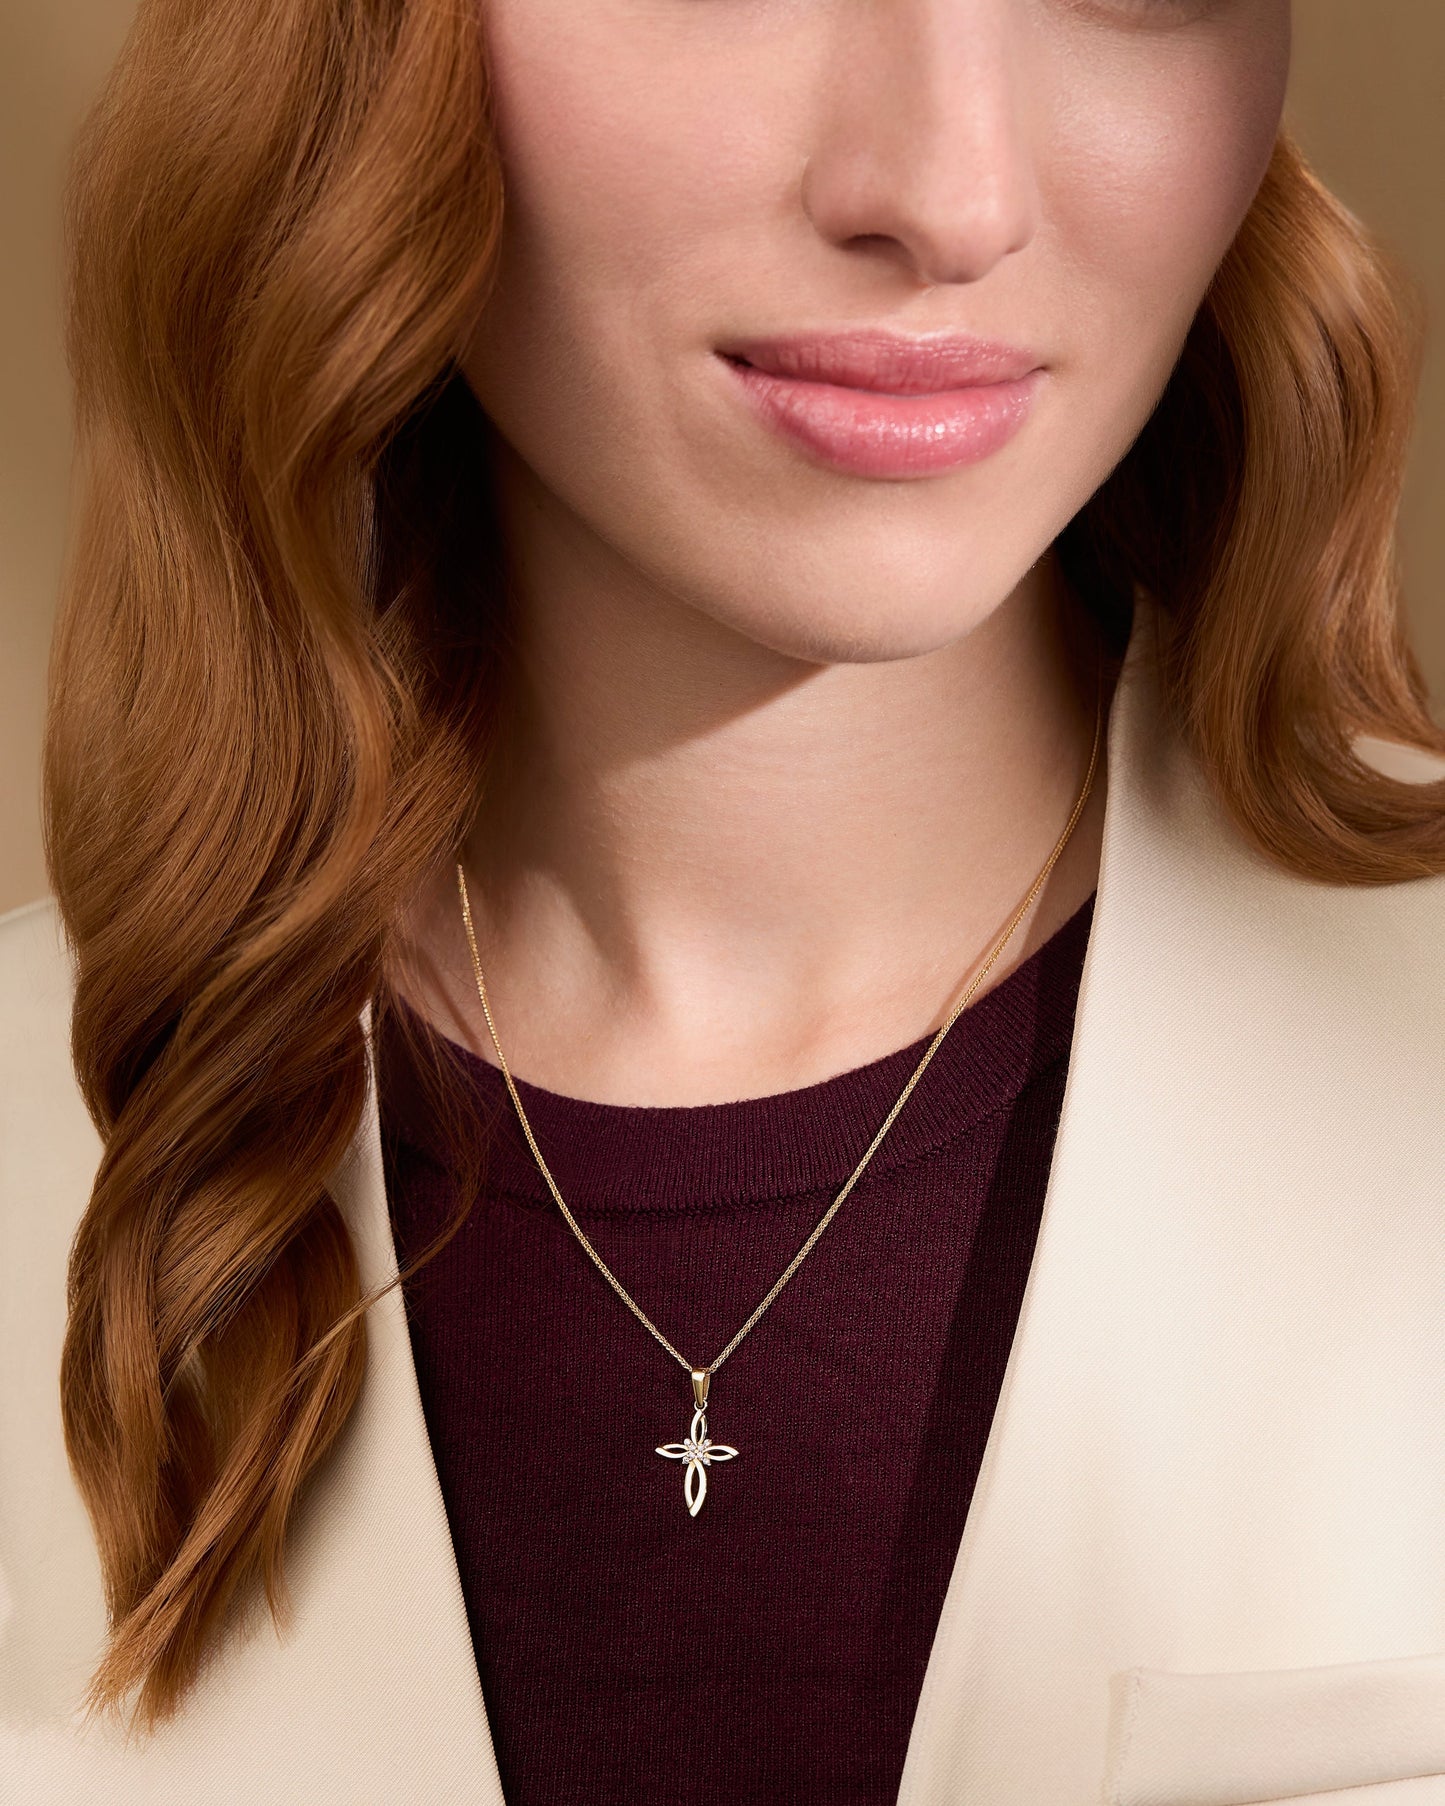 Mondo Cattolico Pendant 19 mm (0.75 in) Yellow Gold Hollow Flower Cross Pendant With Cubic Zirconia in the Center